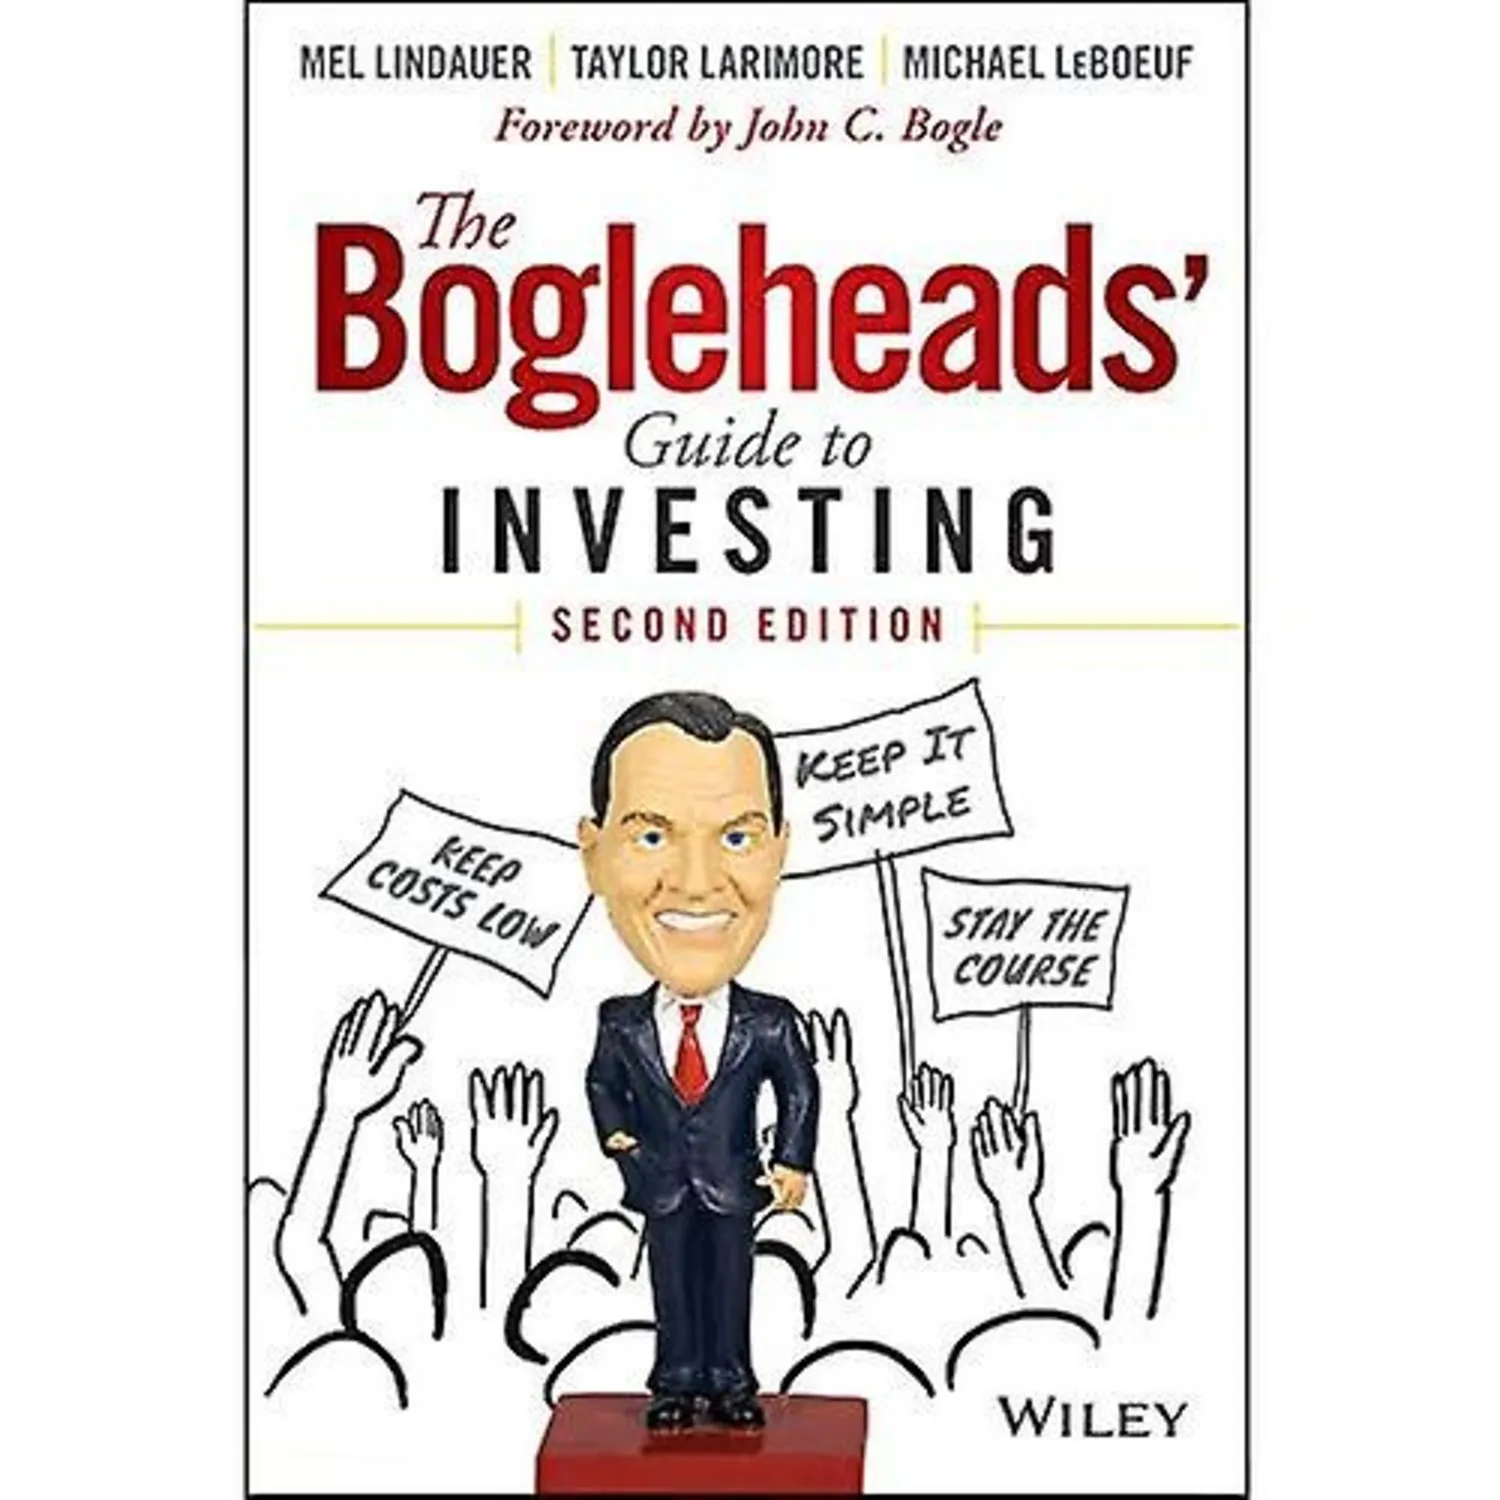 The Bogleheads Guide to Investing by Taylor Larimore, Mel Lindauer, and Michael LeBoeuf